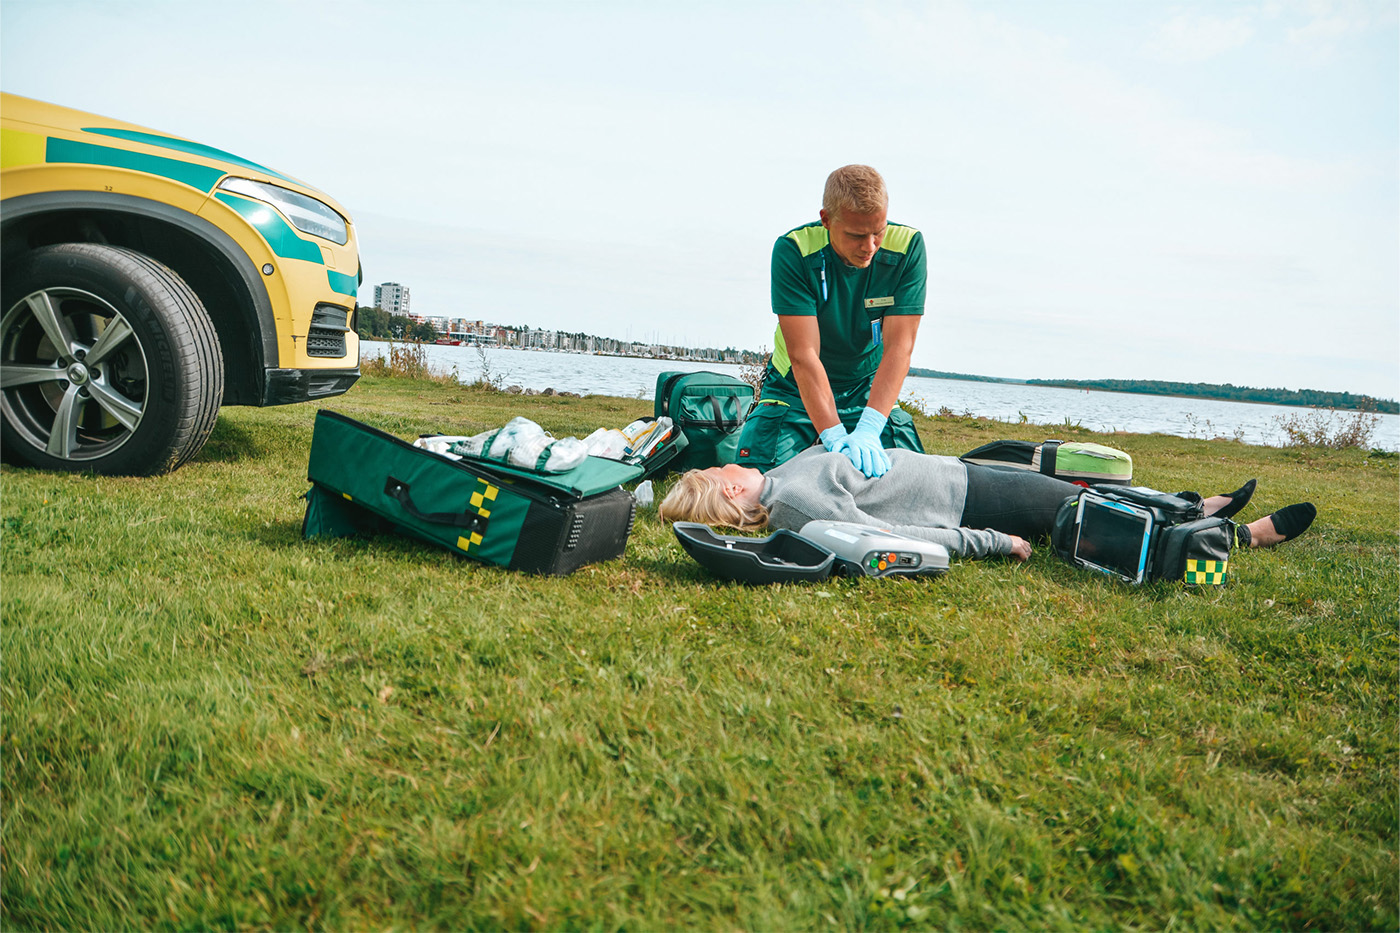 Ambulance personnel performed heart pulmonary resuscitation on a person who collapsed